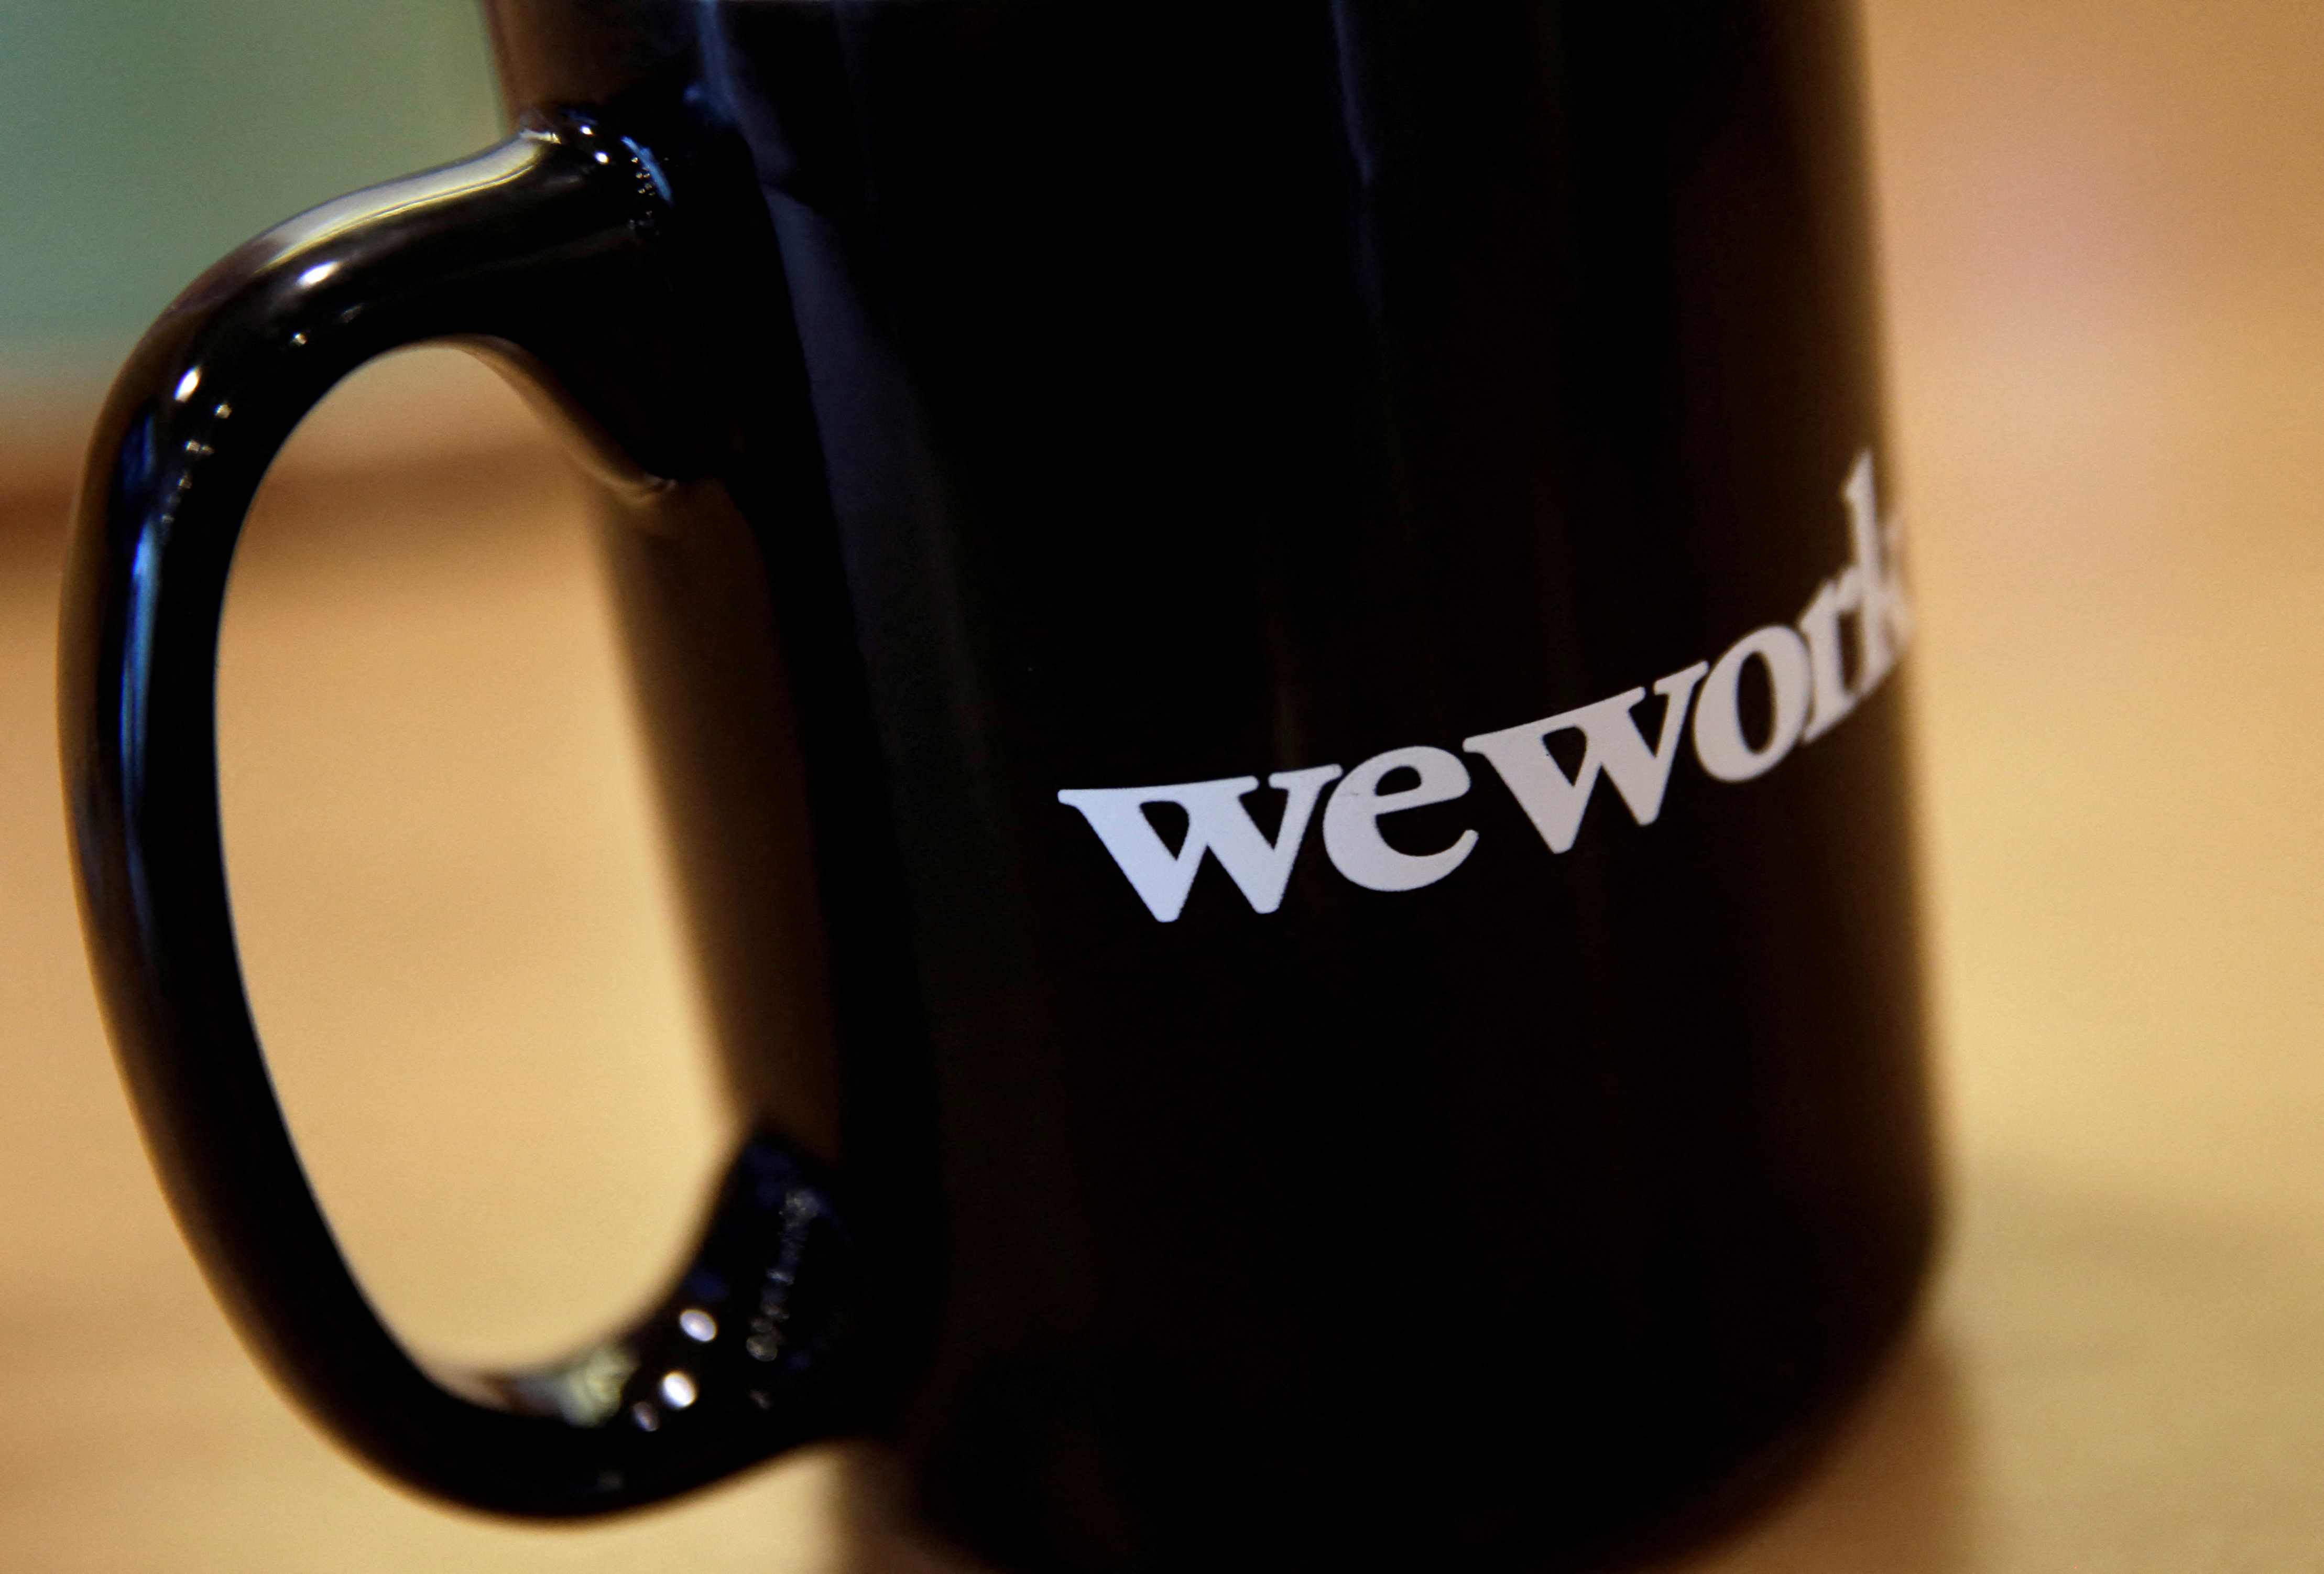 The WeWork logo is seen on a cup at a WeWork office in Beijing